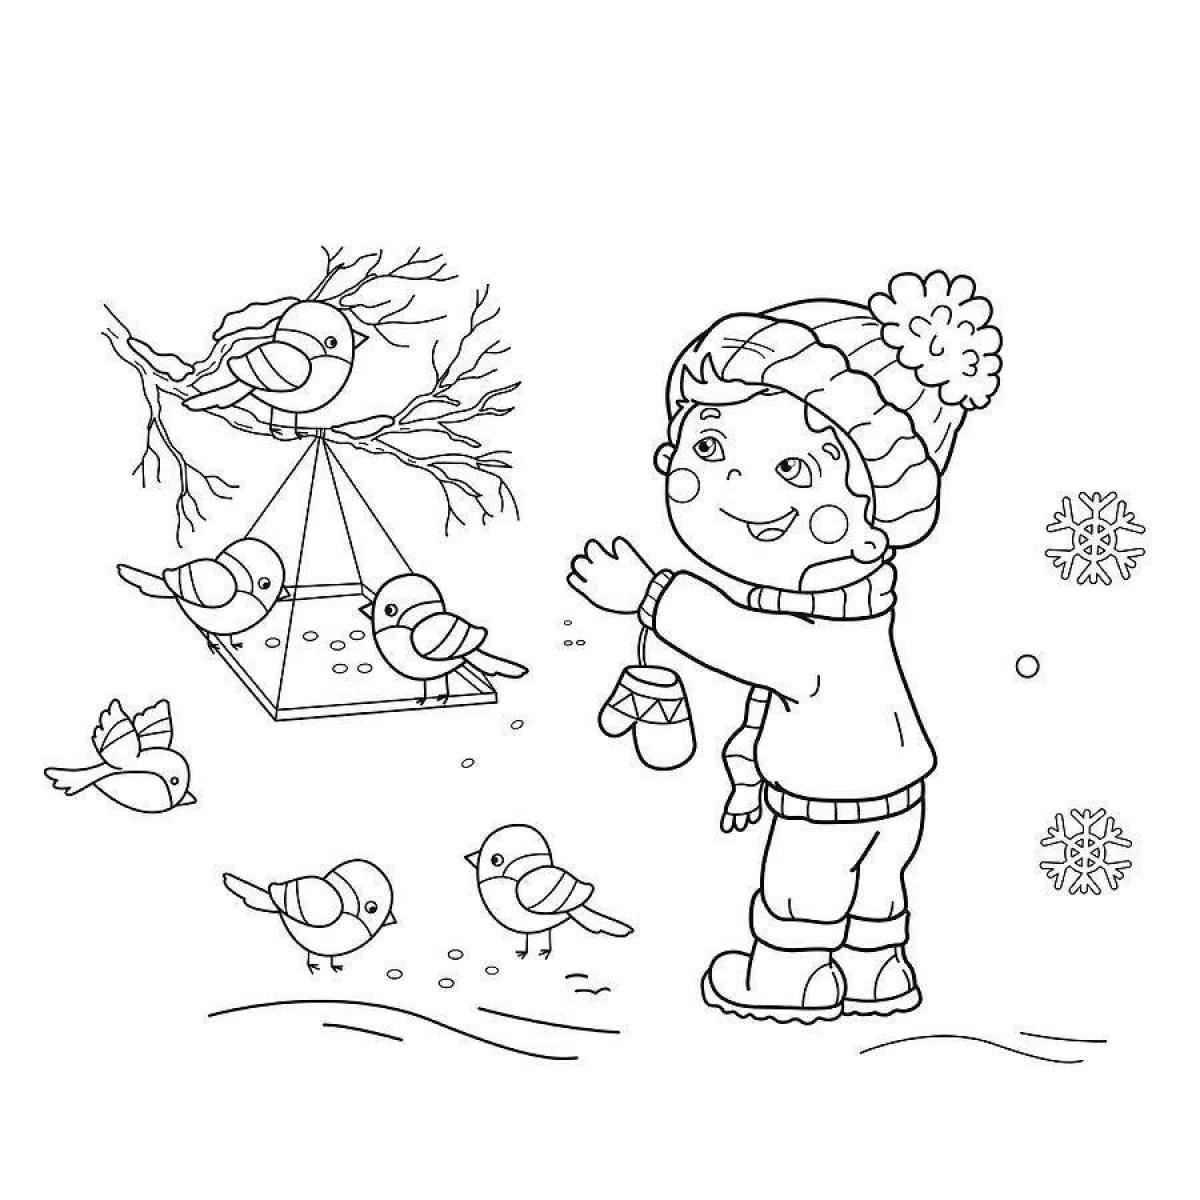 Radiant feed the birds in winter picture for kids 6-7